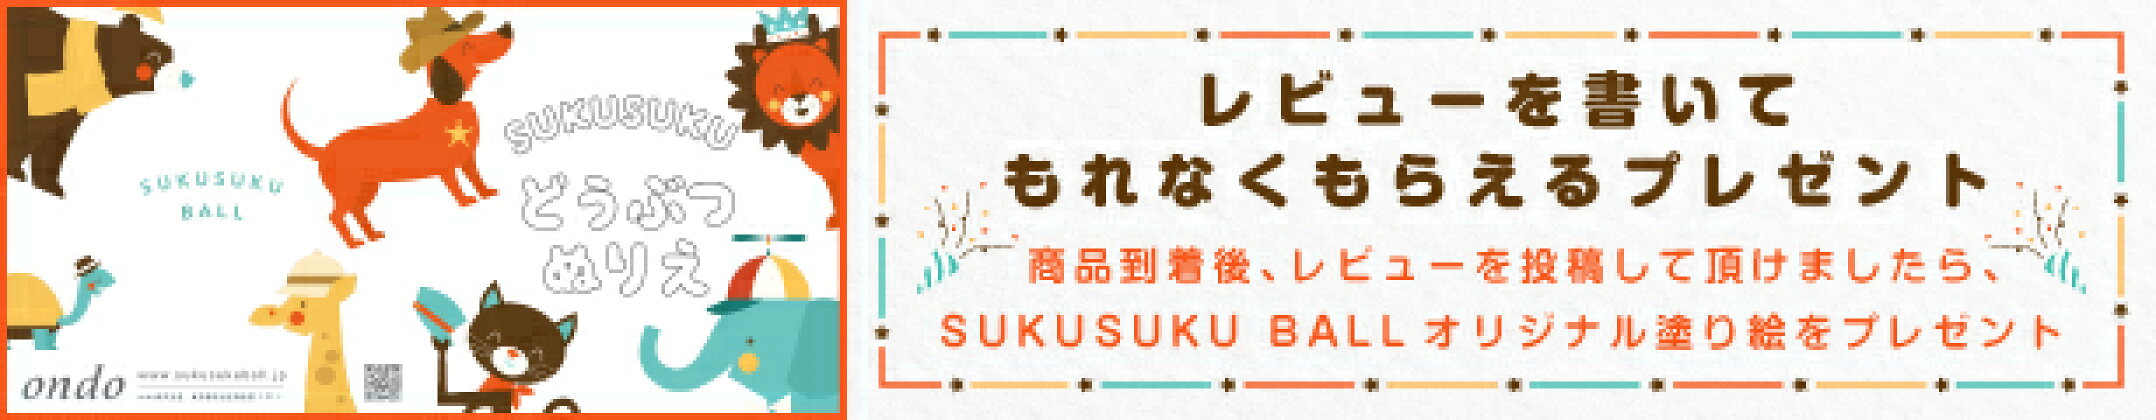 SUKUSUKU REVIEW CAMPAIGN